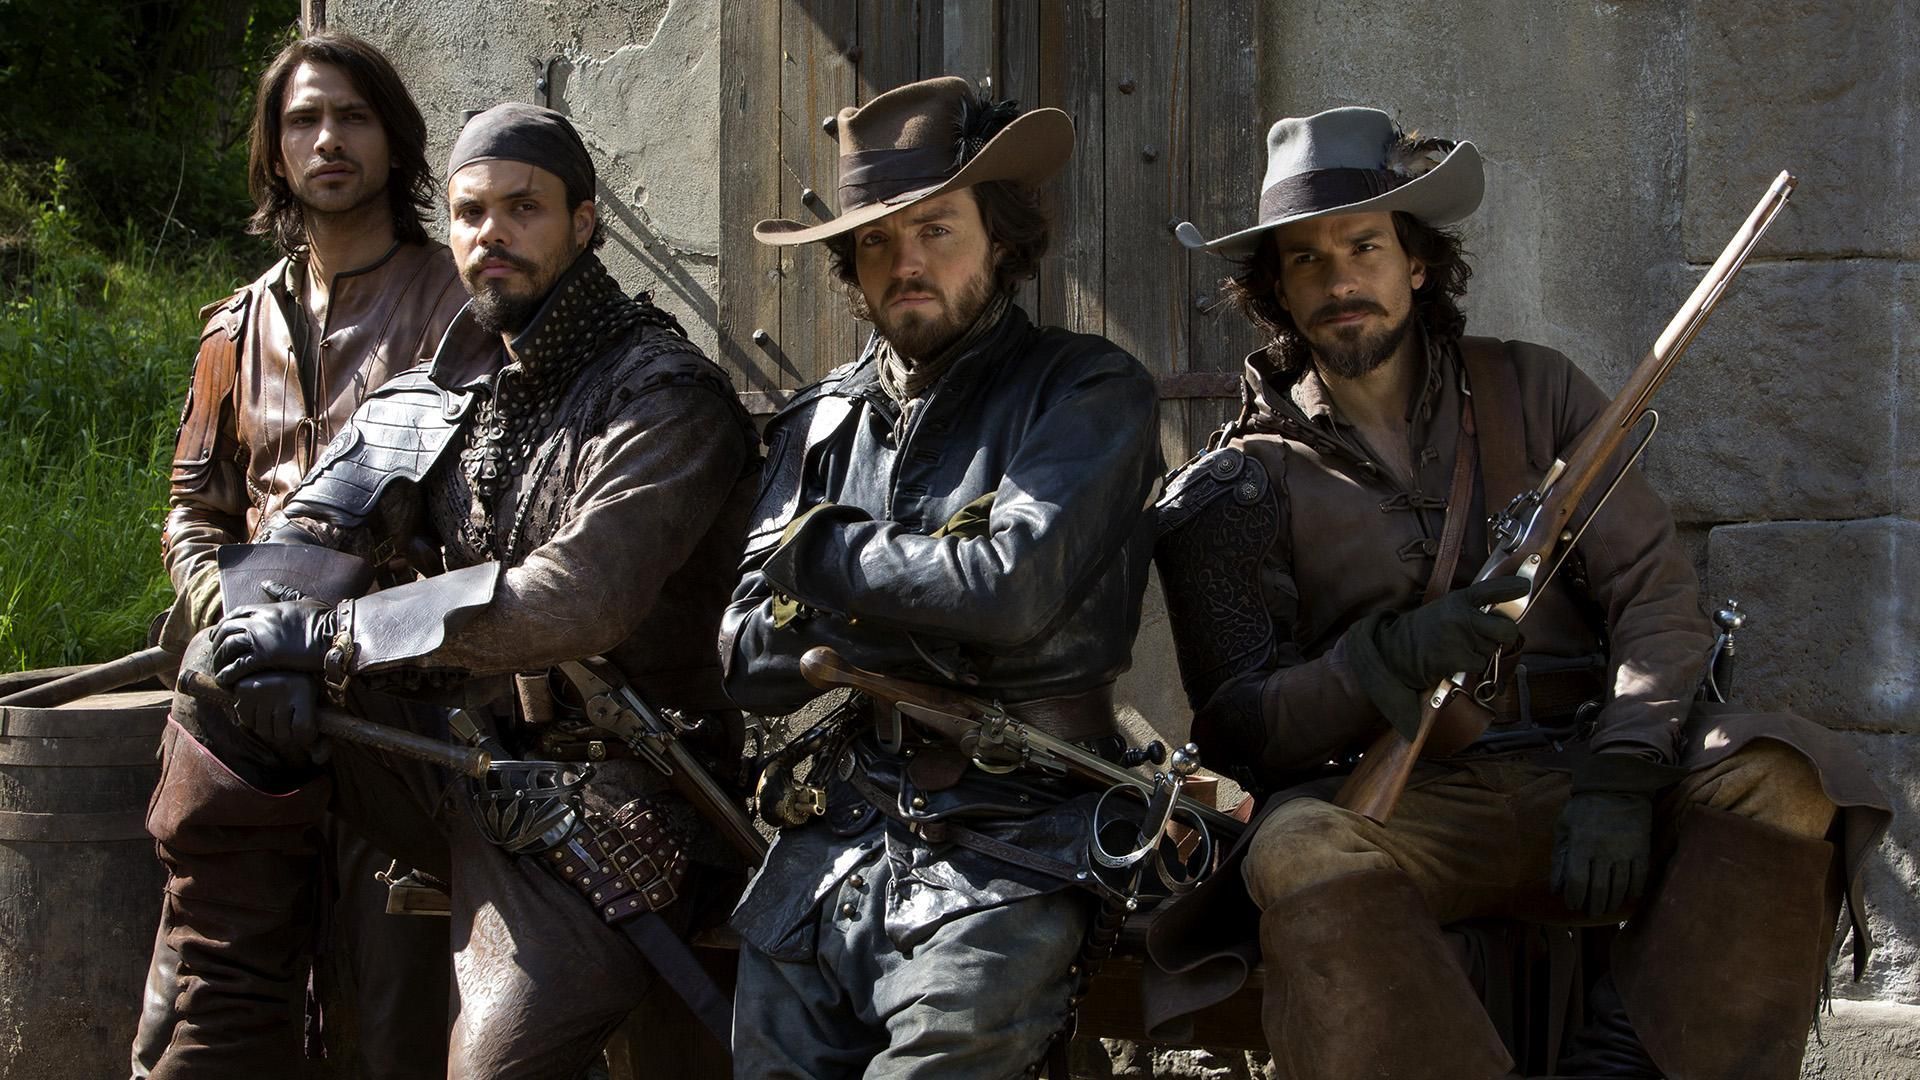 the musketeers. The Musketeers Wallpaper HD Download. The musketeers tv series, Musketeers, Bbc musketeers